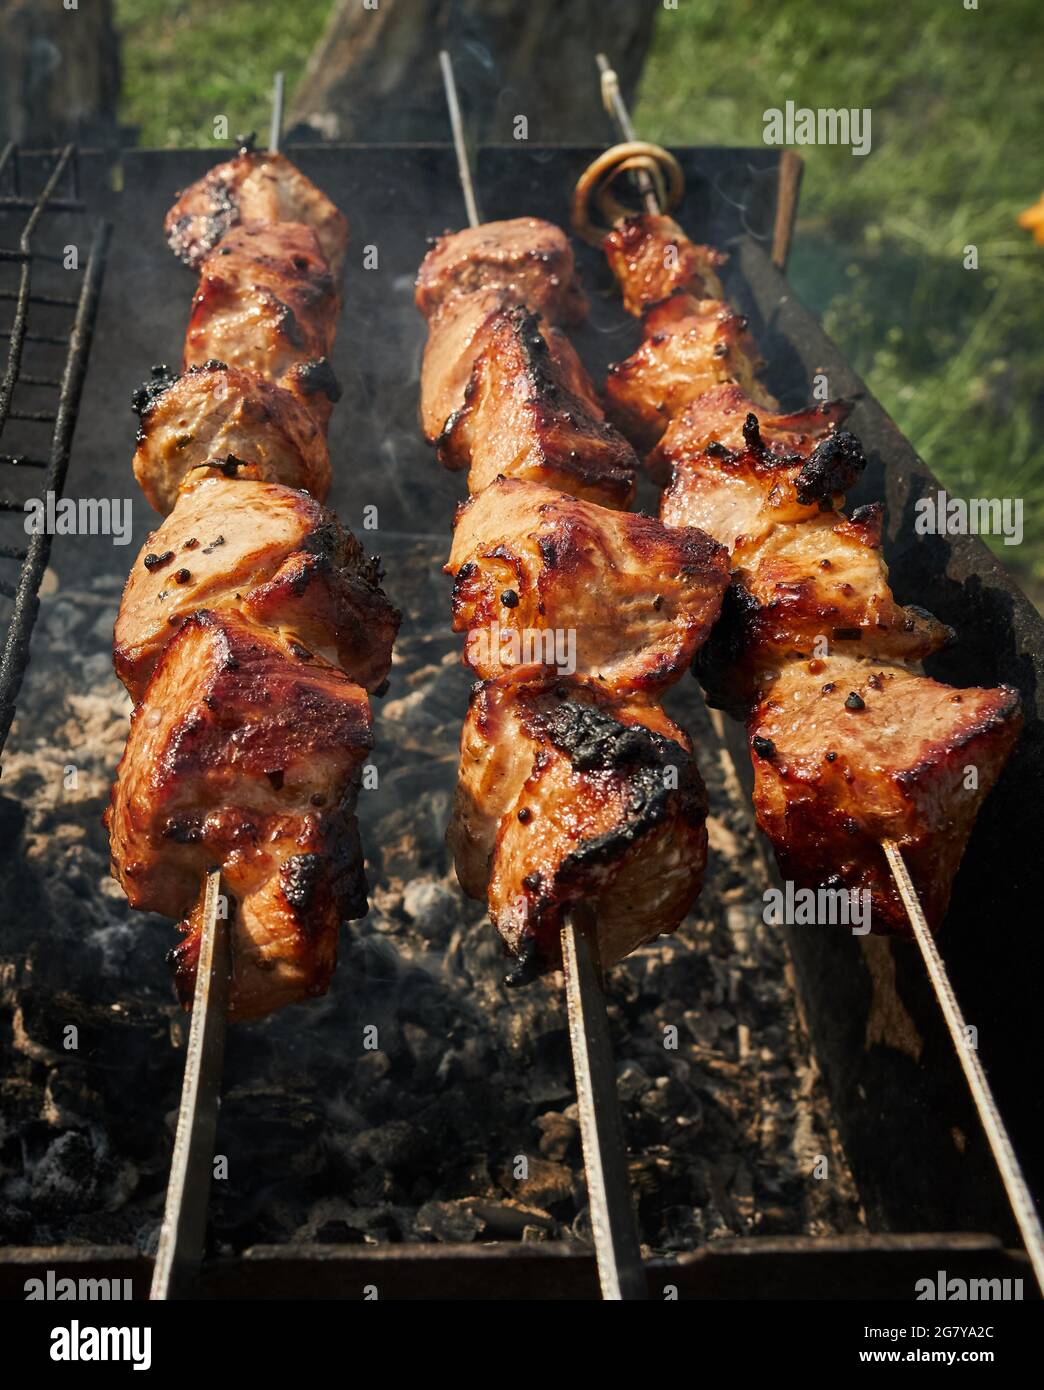 Barbeque meat and sausages or bratwurst on a grill grate in backyard. Man preparing shashlik or shish kebab over charcoal. Grilled meat on metal Stock Photo